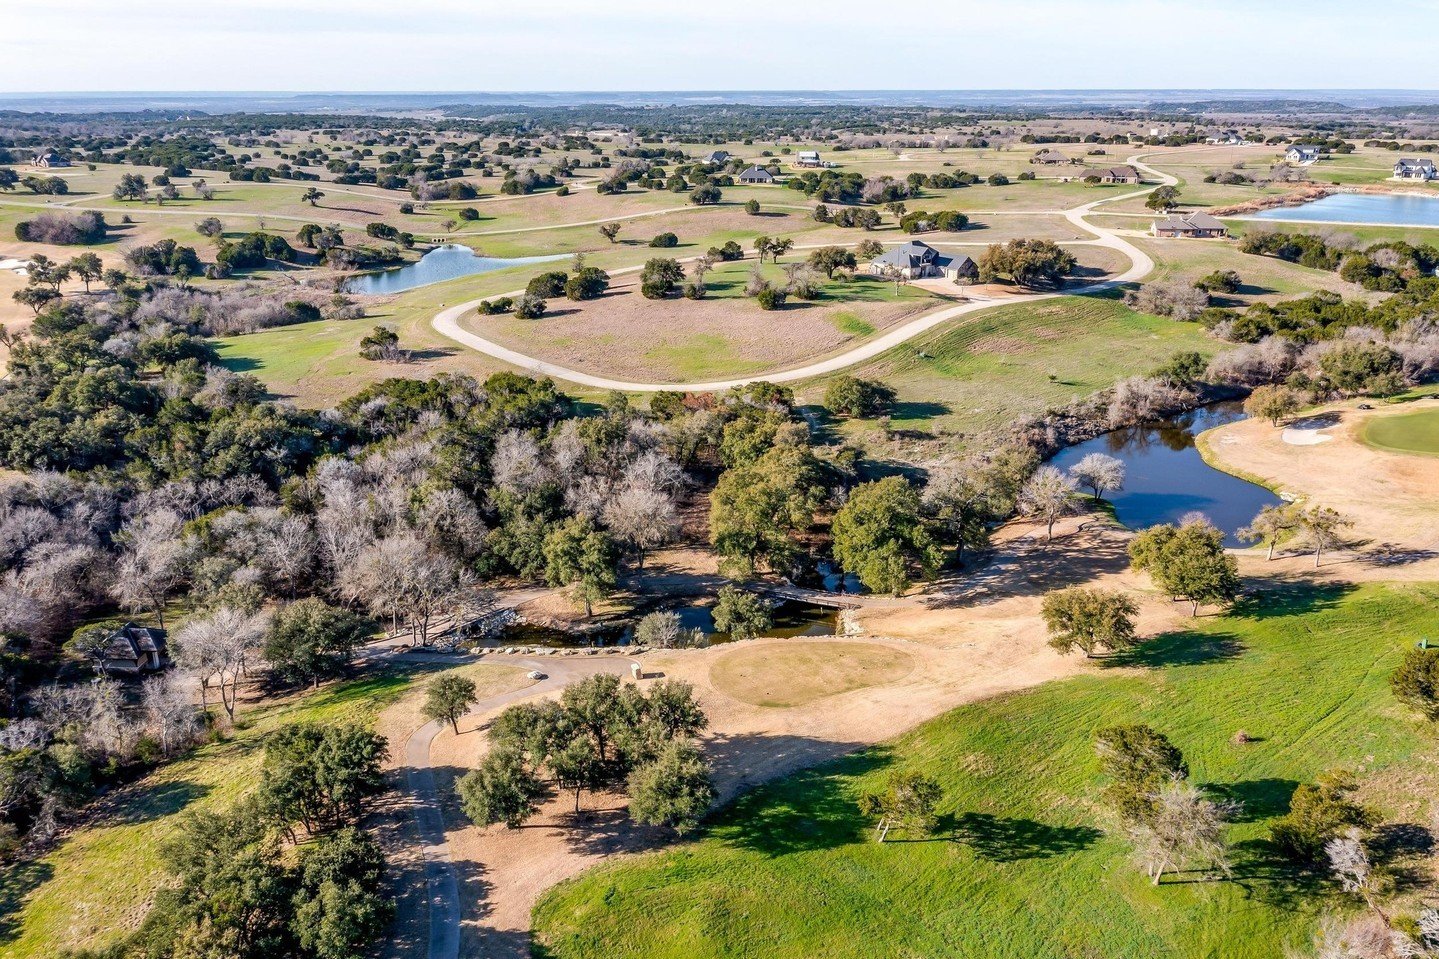 An amazing land opportunity to create your own little slice of paradise at The Retreat in Cleburne, TX 🌳⁠
⁠
6412 BERKSHIRE CIRCLE | CLEBURNE, TEXAS 76033⁠
⁠
Spanning over 3,000 acres of secluded beauty, this exclusive community offers an unparallele